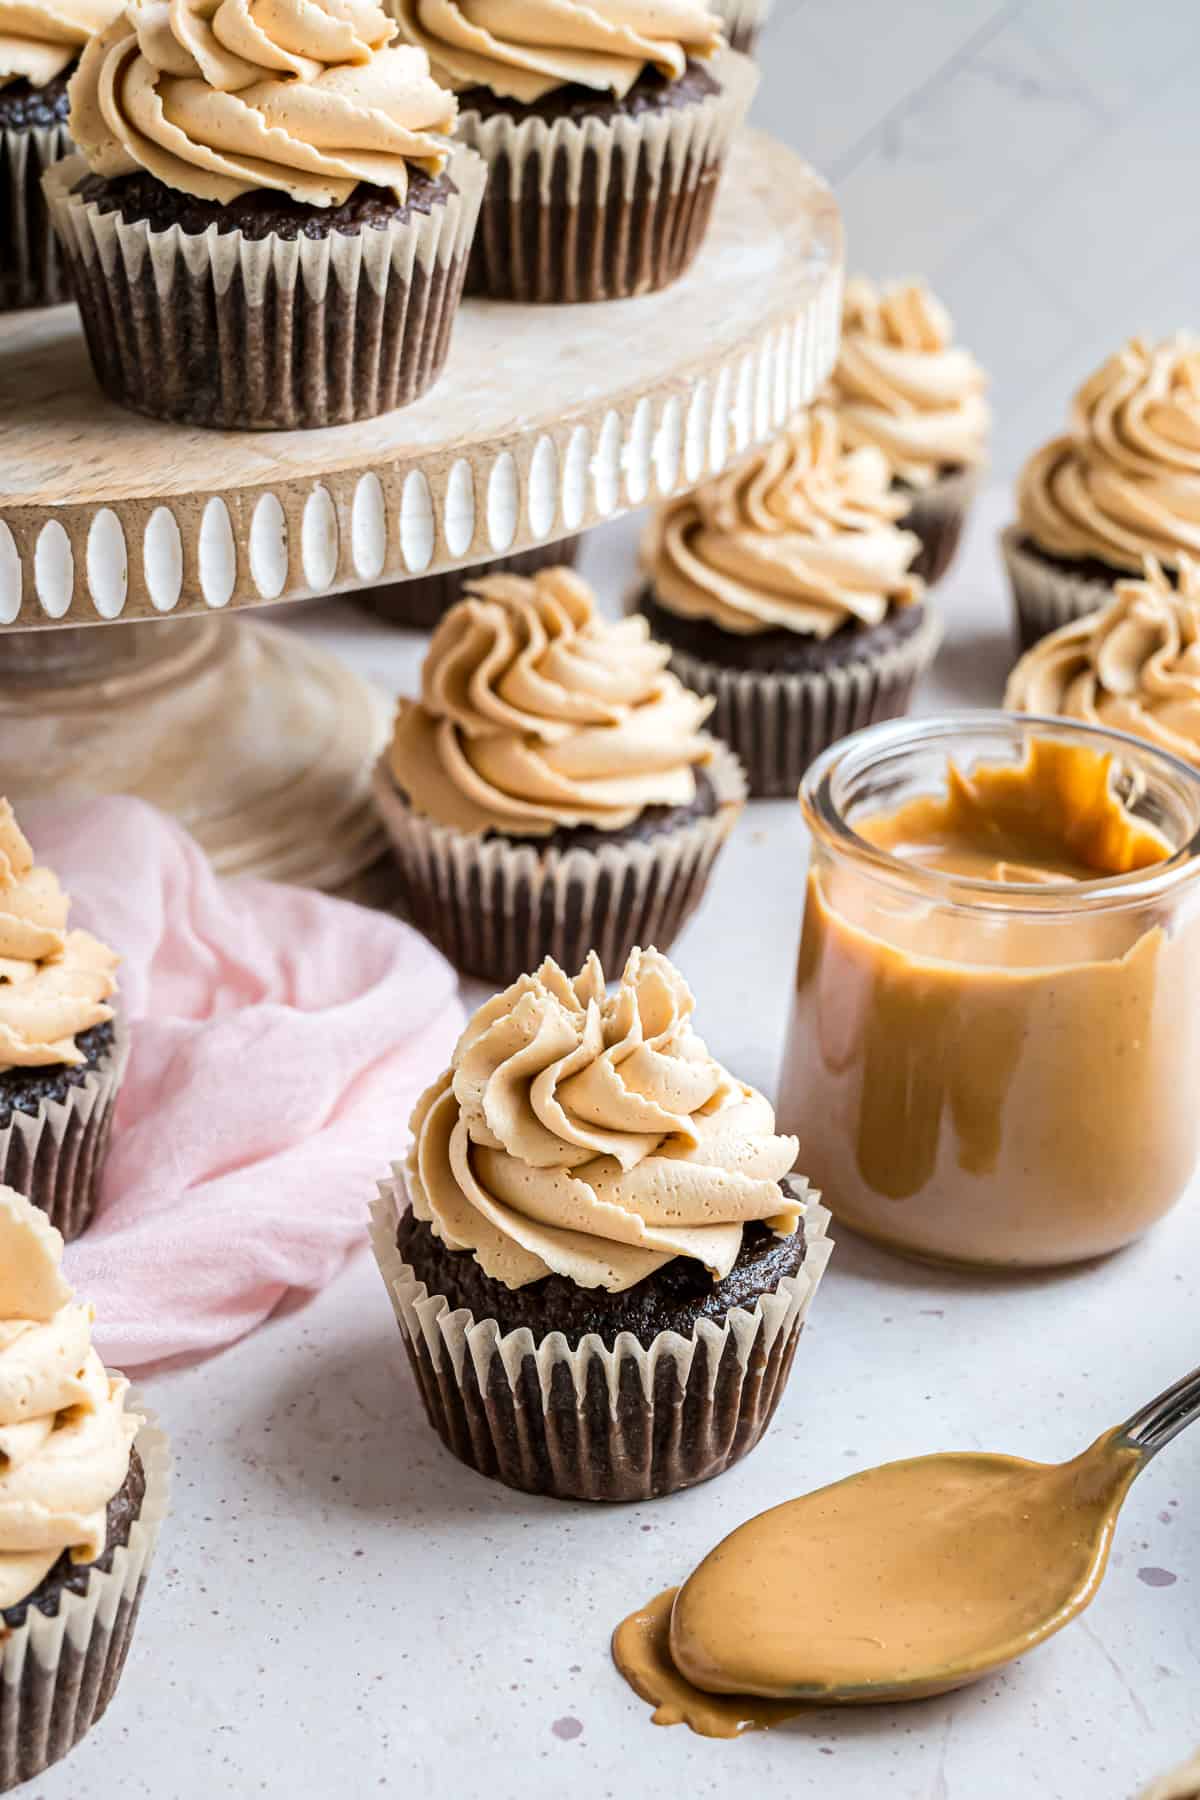 Peanut butter frosting piped on a number of chocolate cupcakes, some on a cake stand.